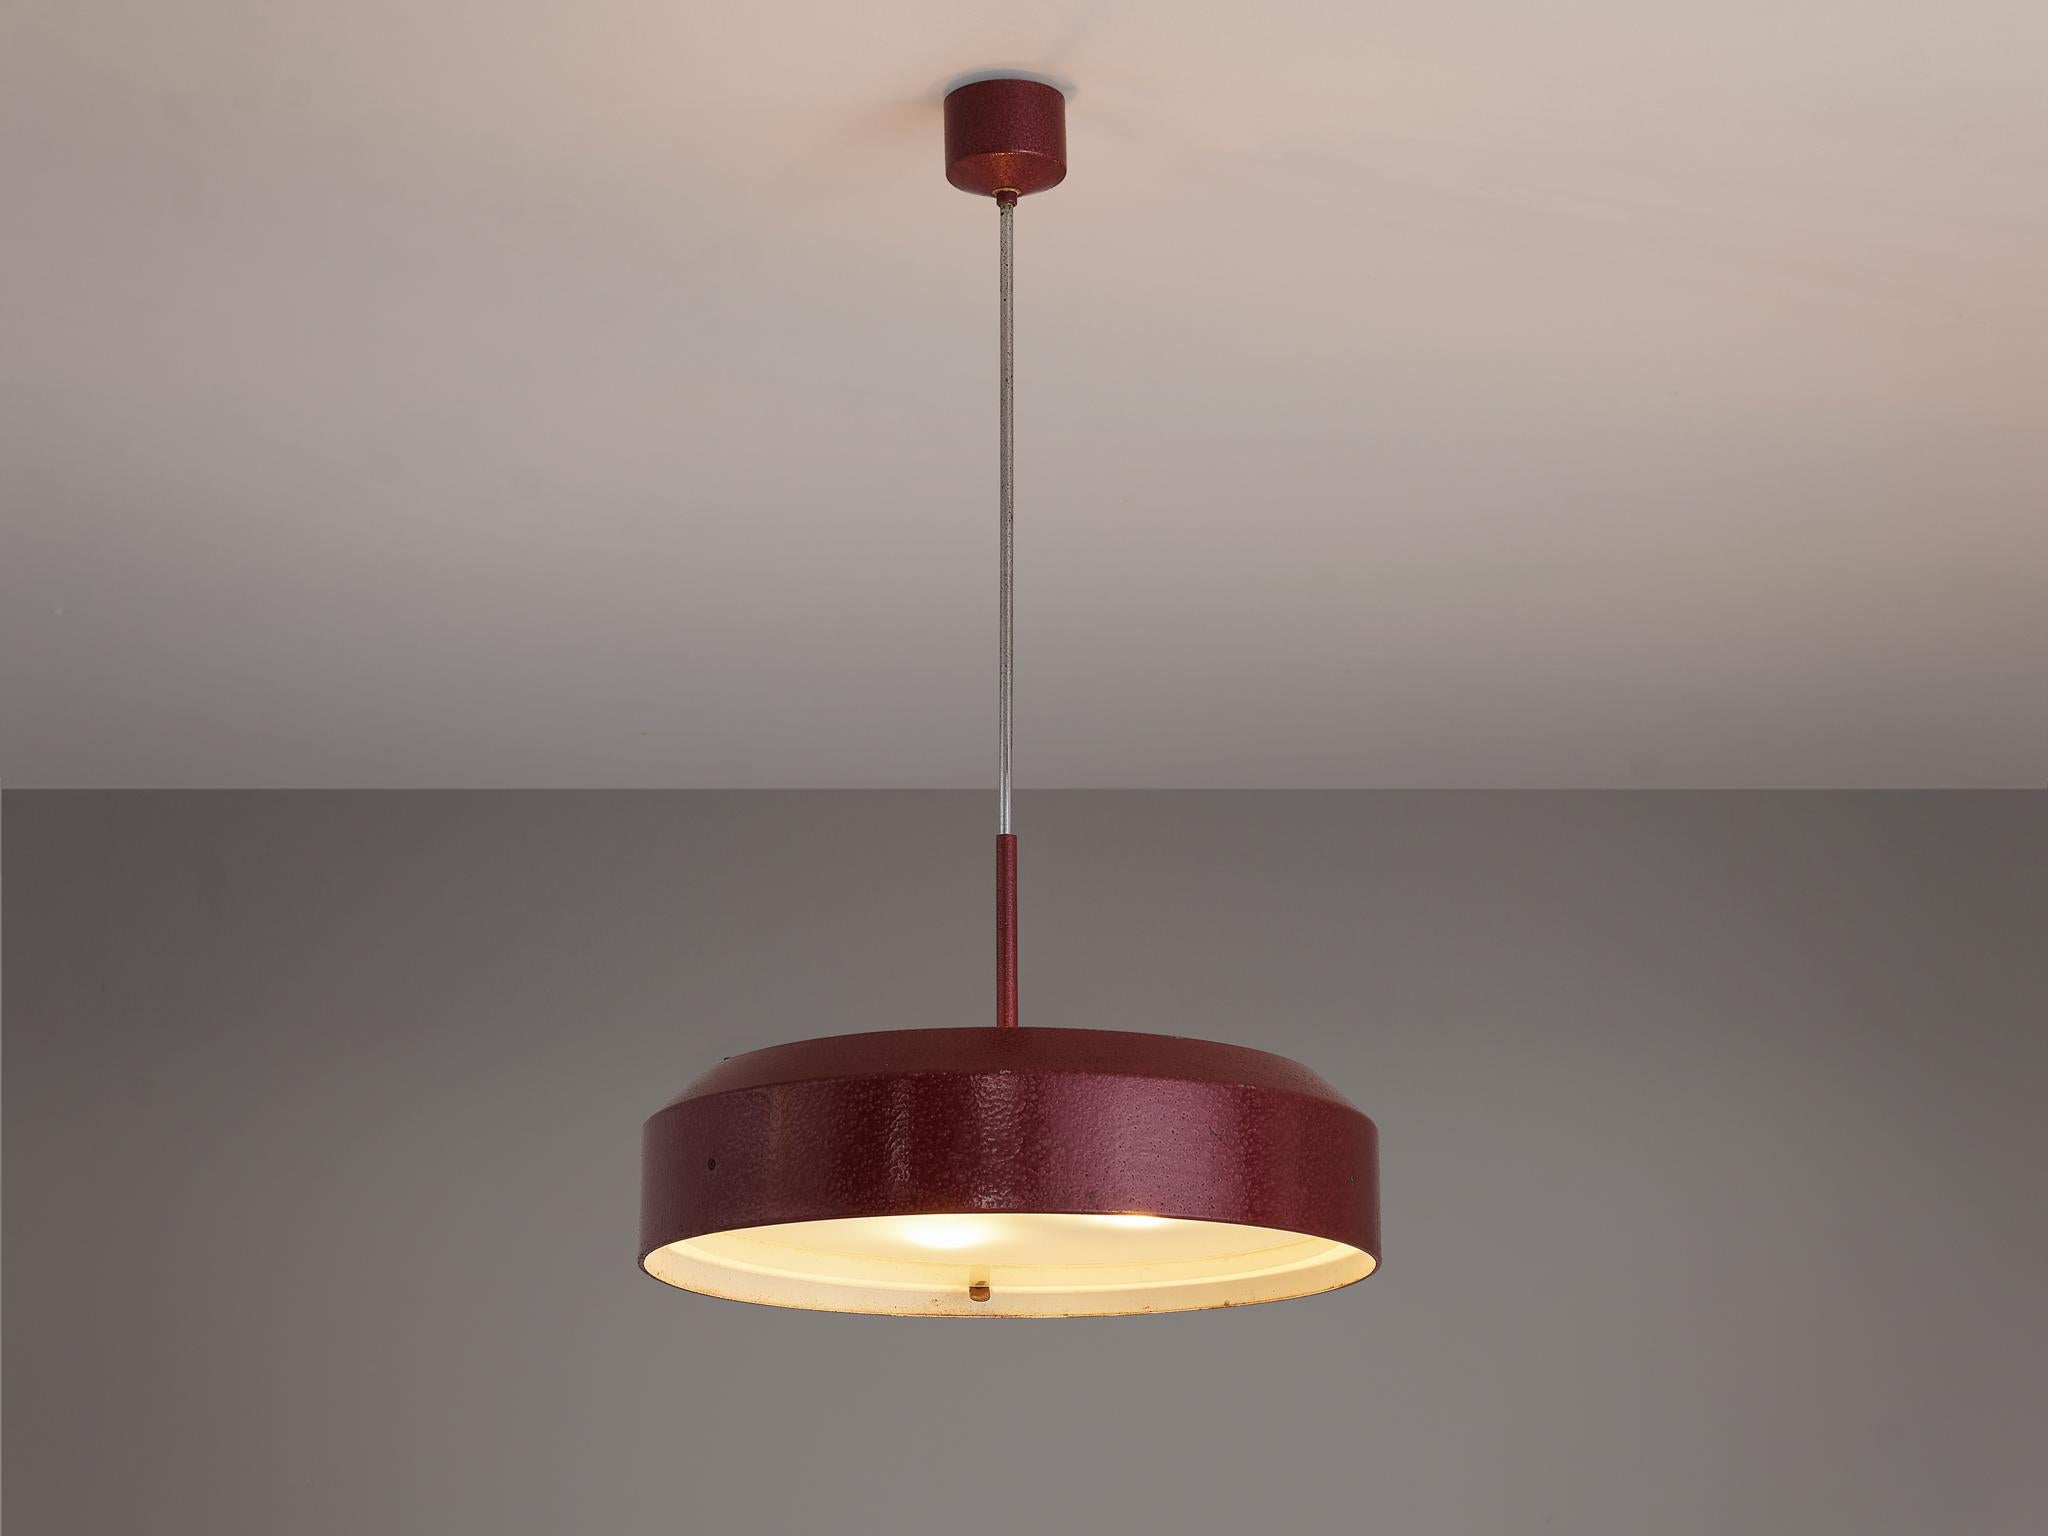 Josef Hurka for Napako, pendant lamp, model '1330', glass, enameled iron, The Netherlands, 1950s

This exceptional pendant lamp, known as type '1330,' embodies an industrial aesthetic and was crafted by the designer Josef Hurka. The circular shade,